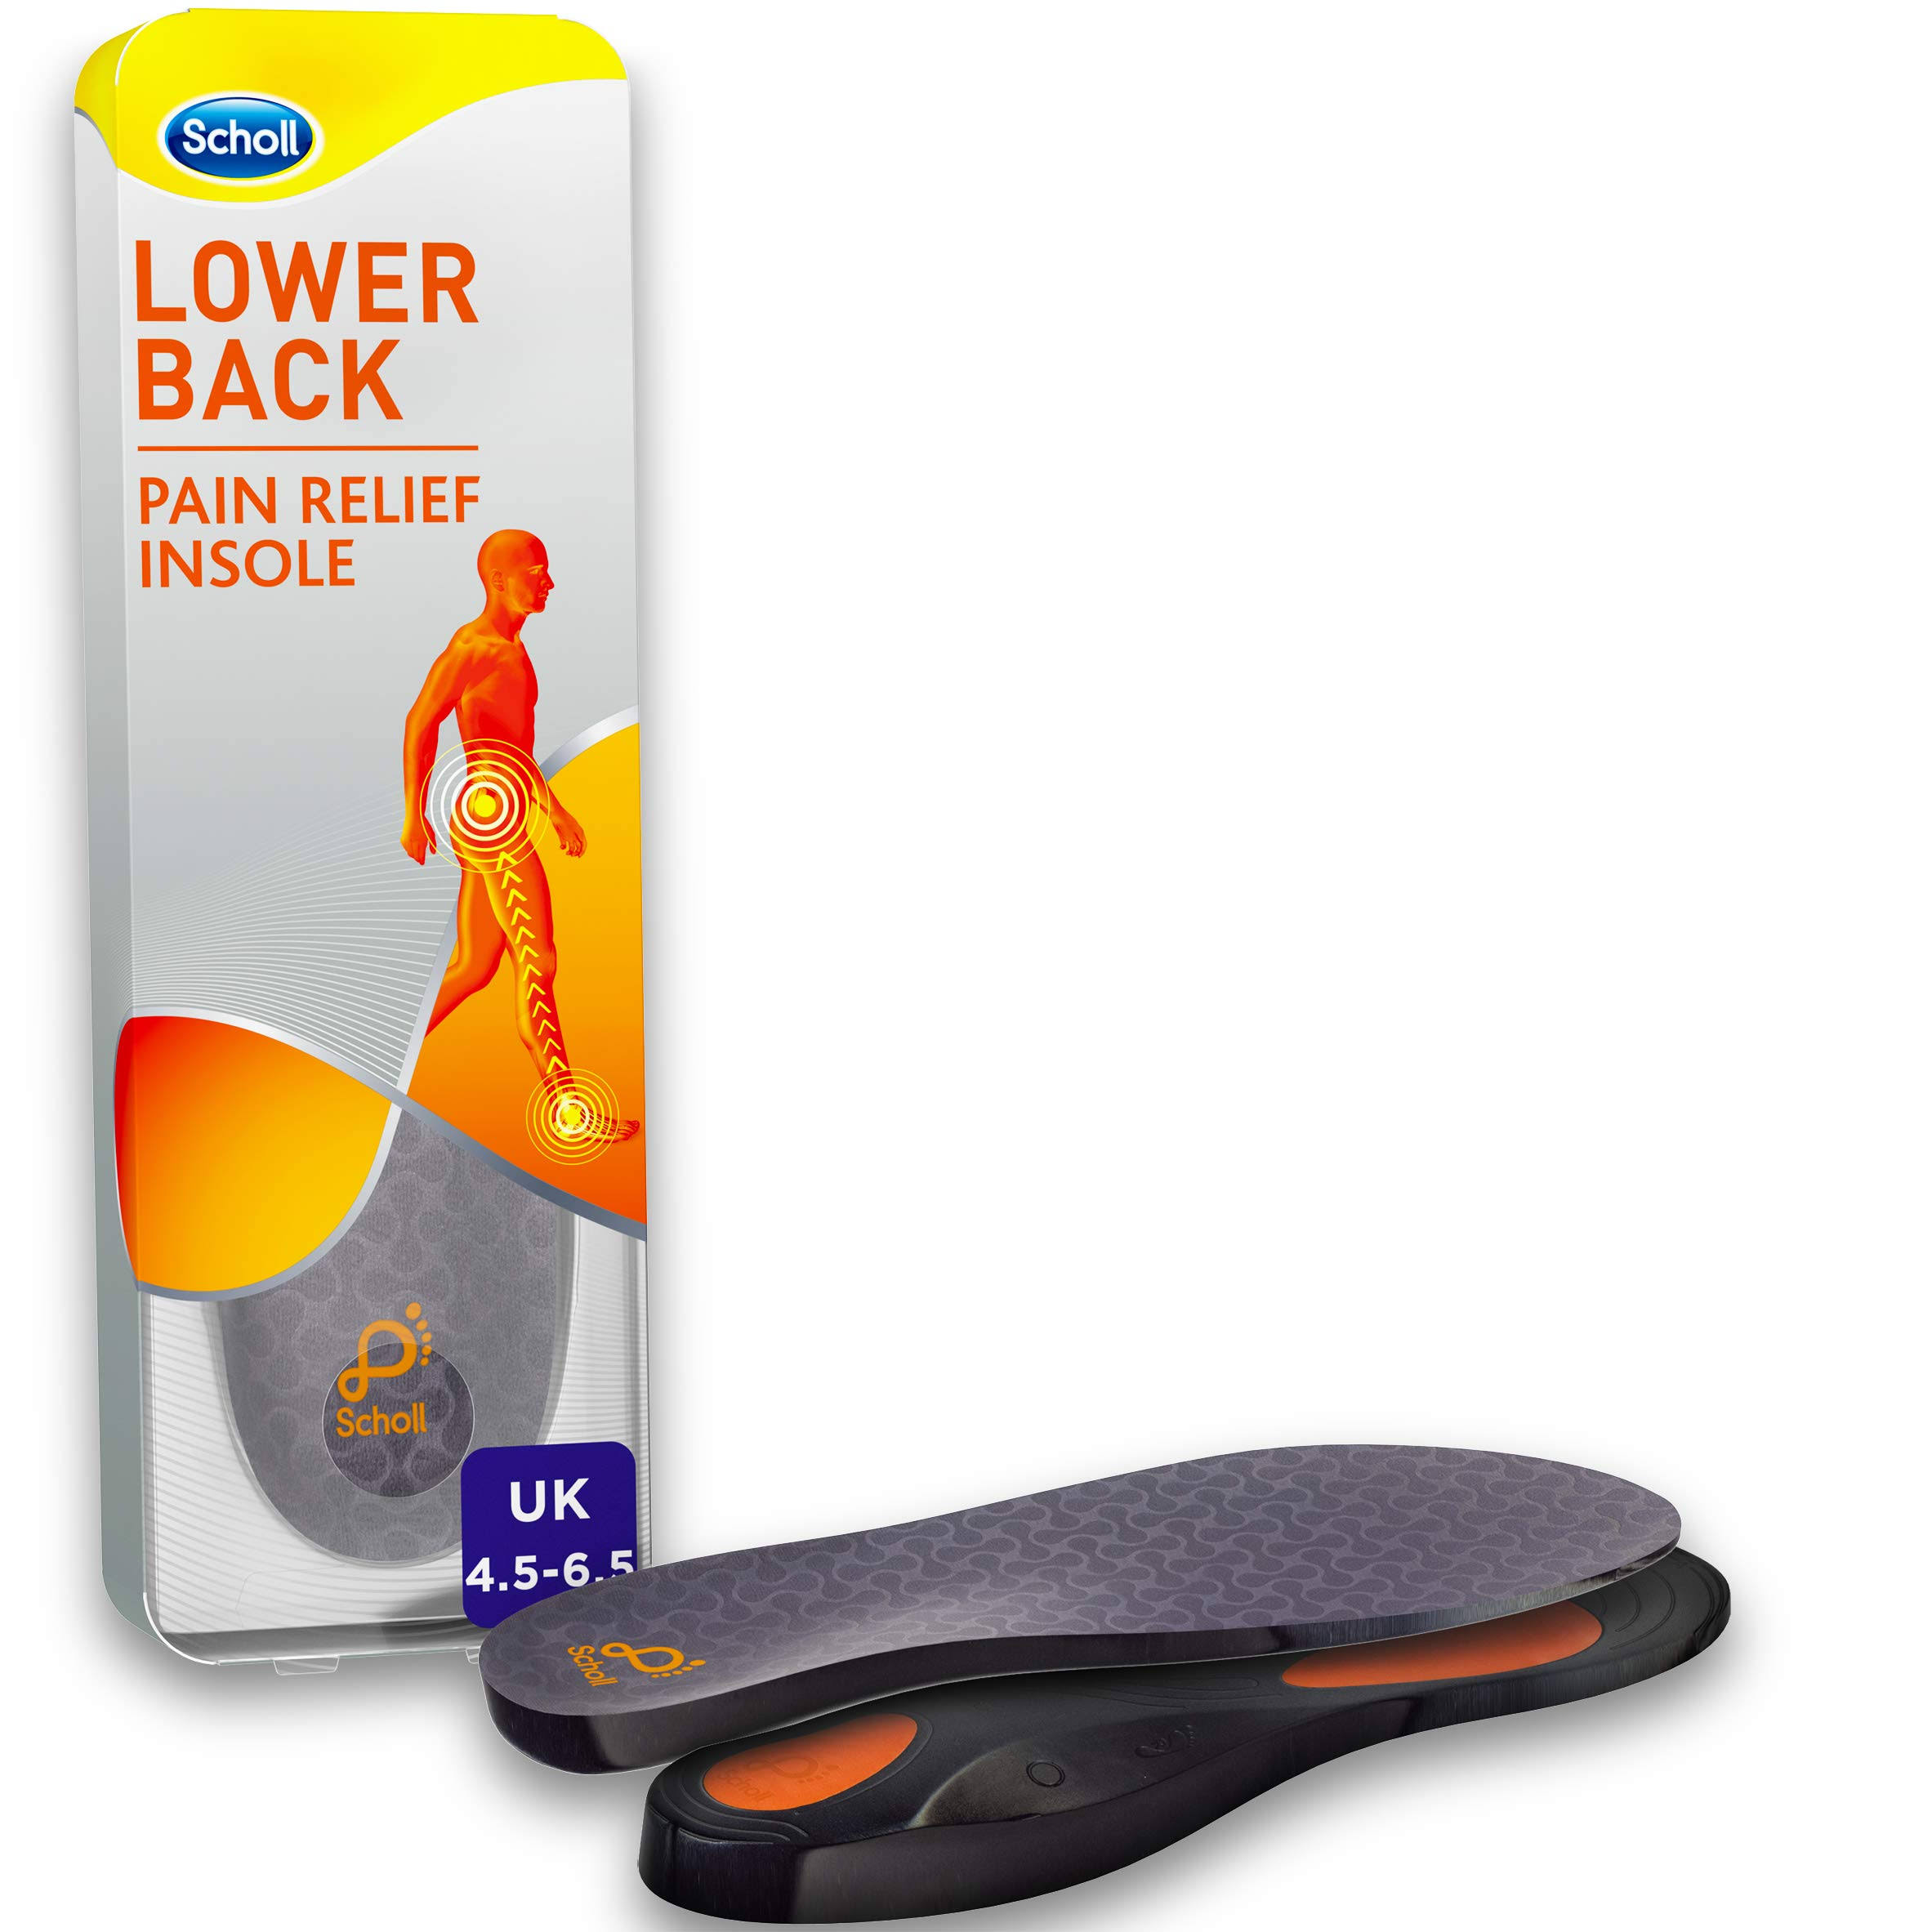 Scholl Orthotic Insole Lower Back Pain Relief, Small, UK Size 4.5-6.5